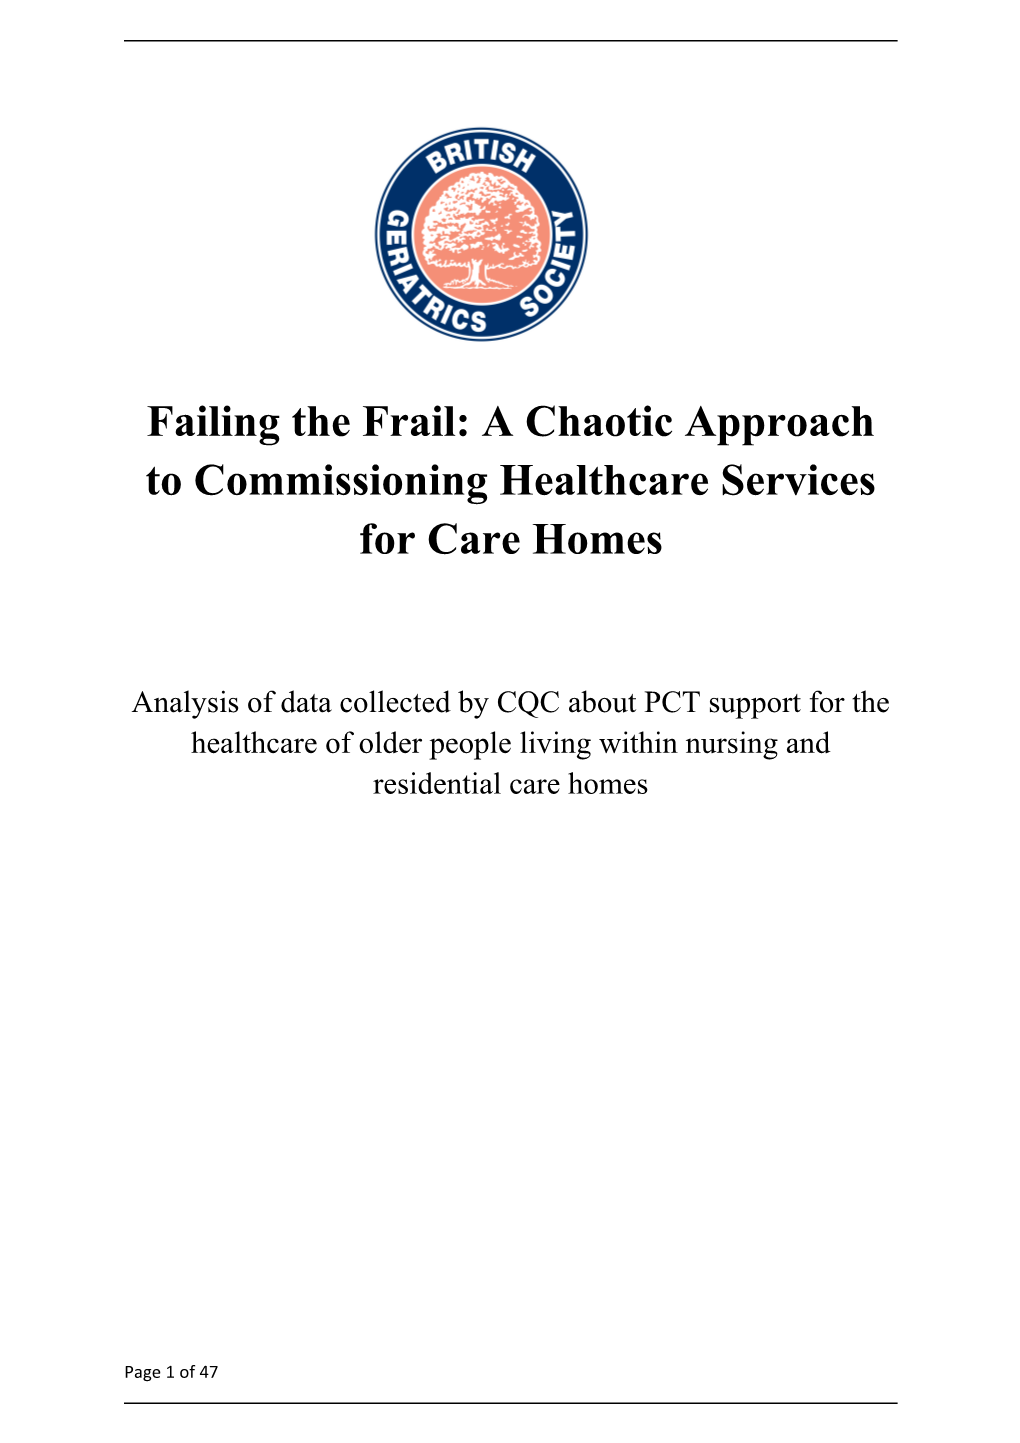 Analysis of Data Collected by CQC About PCT Support for the Healthcare of Older People